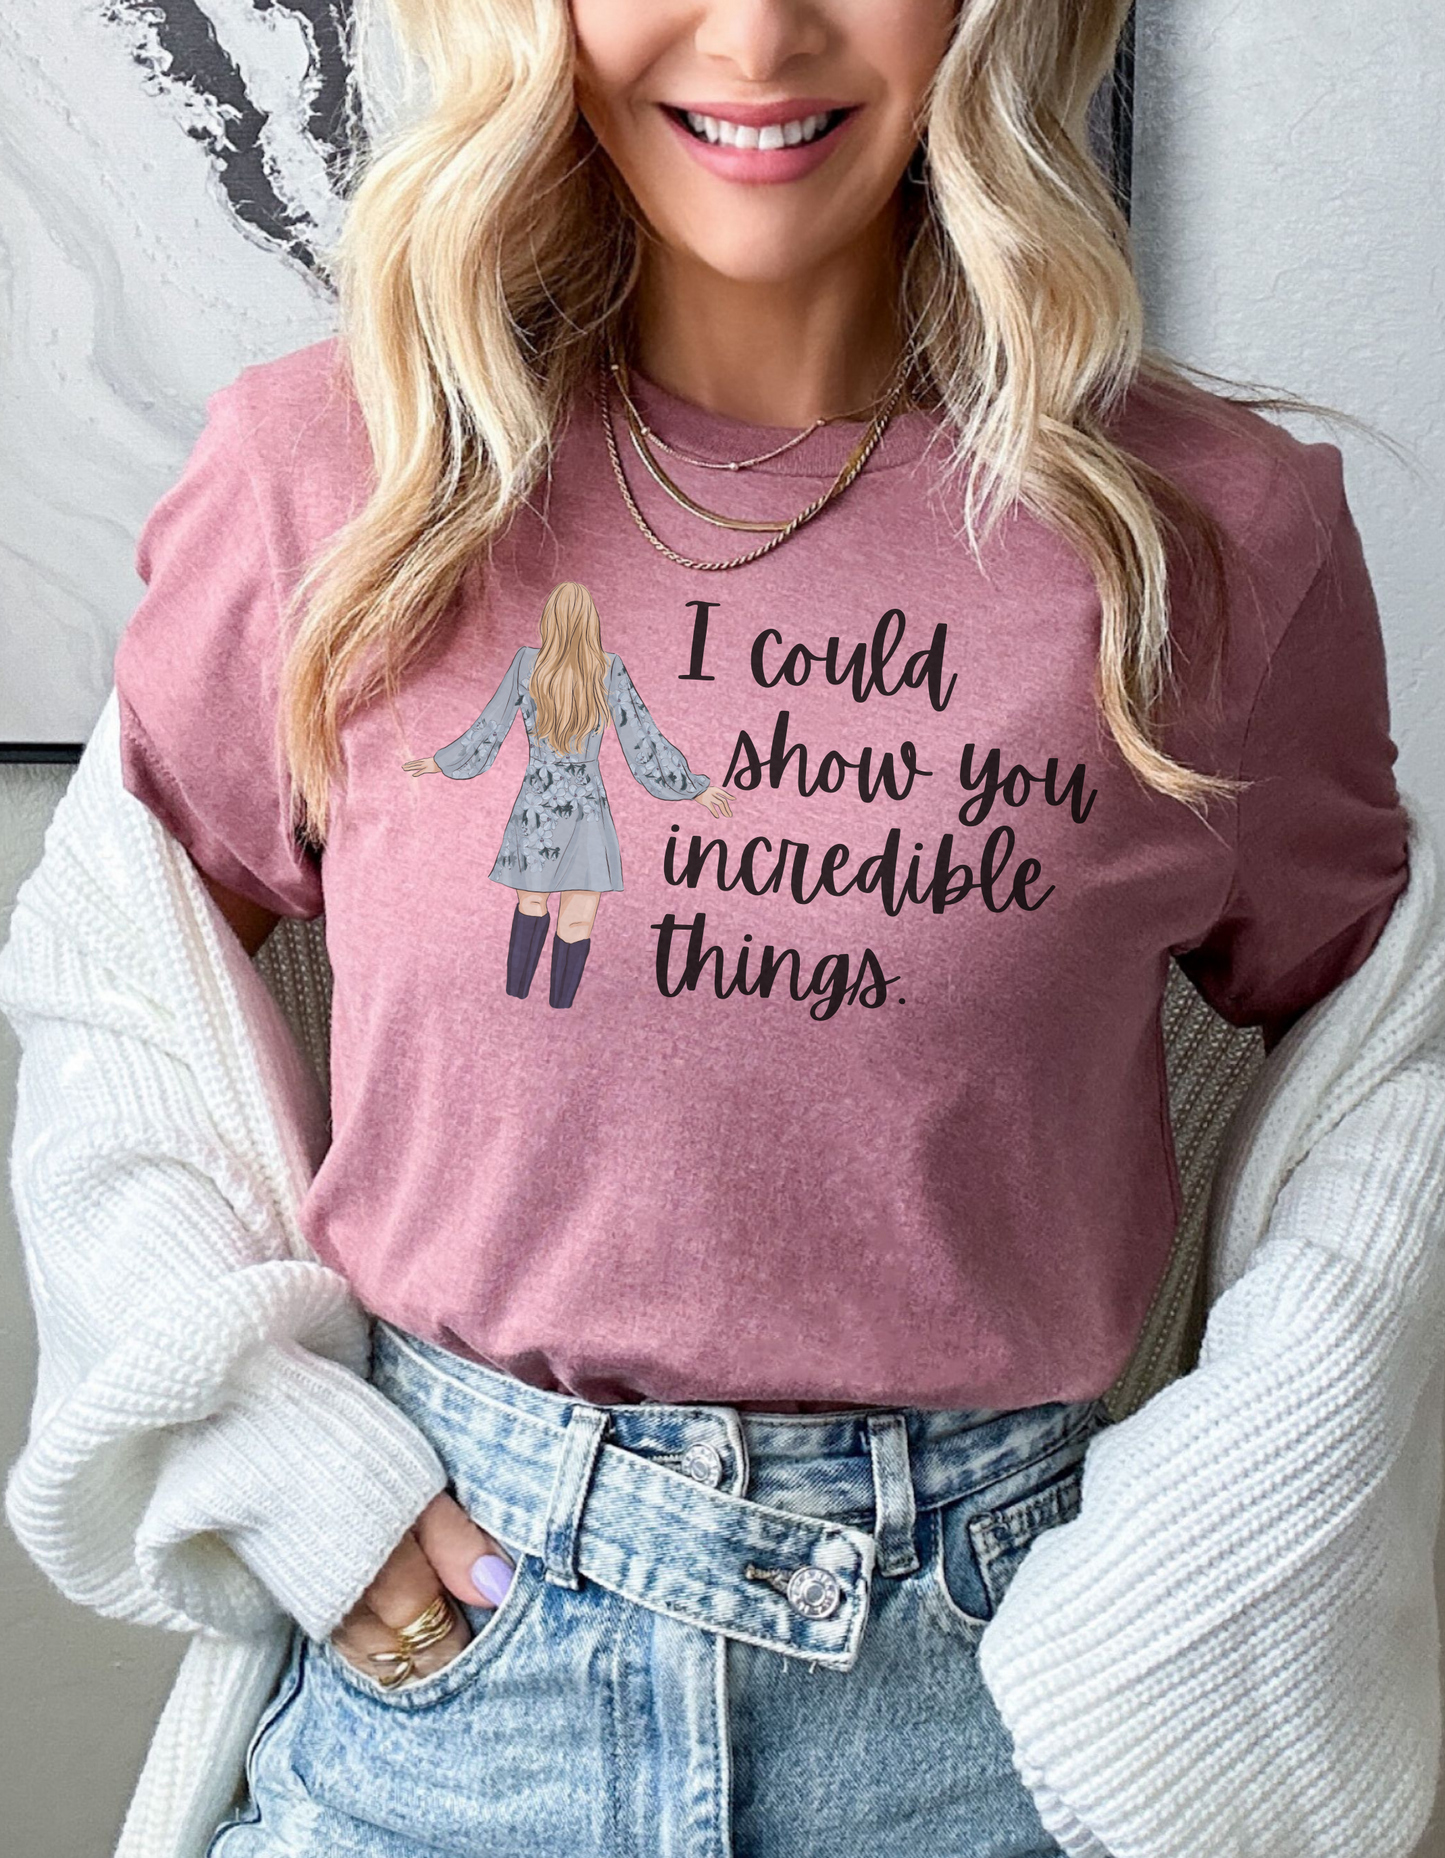 Taylor Swift Preppy Picture T-Shirt - I Could Show You Incredible Things